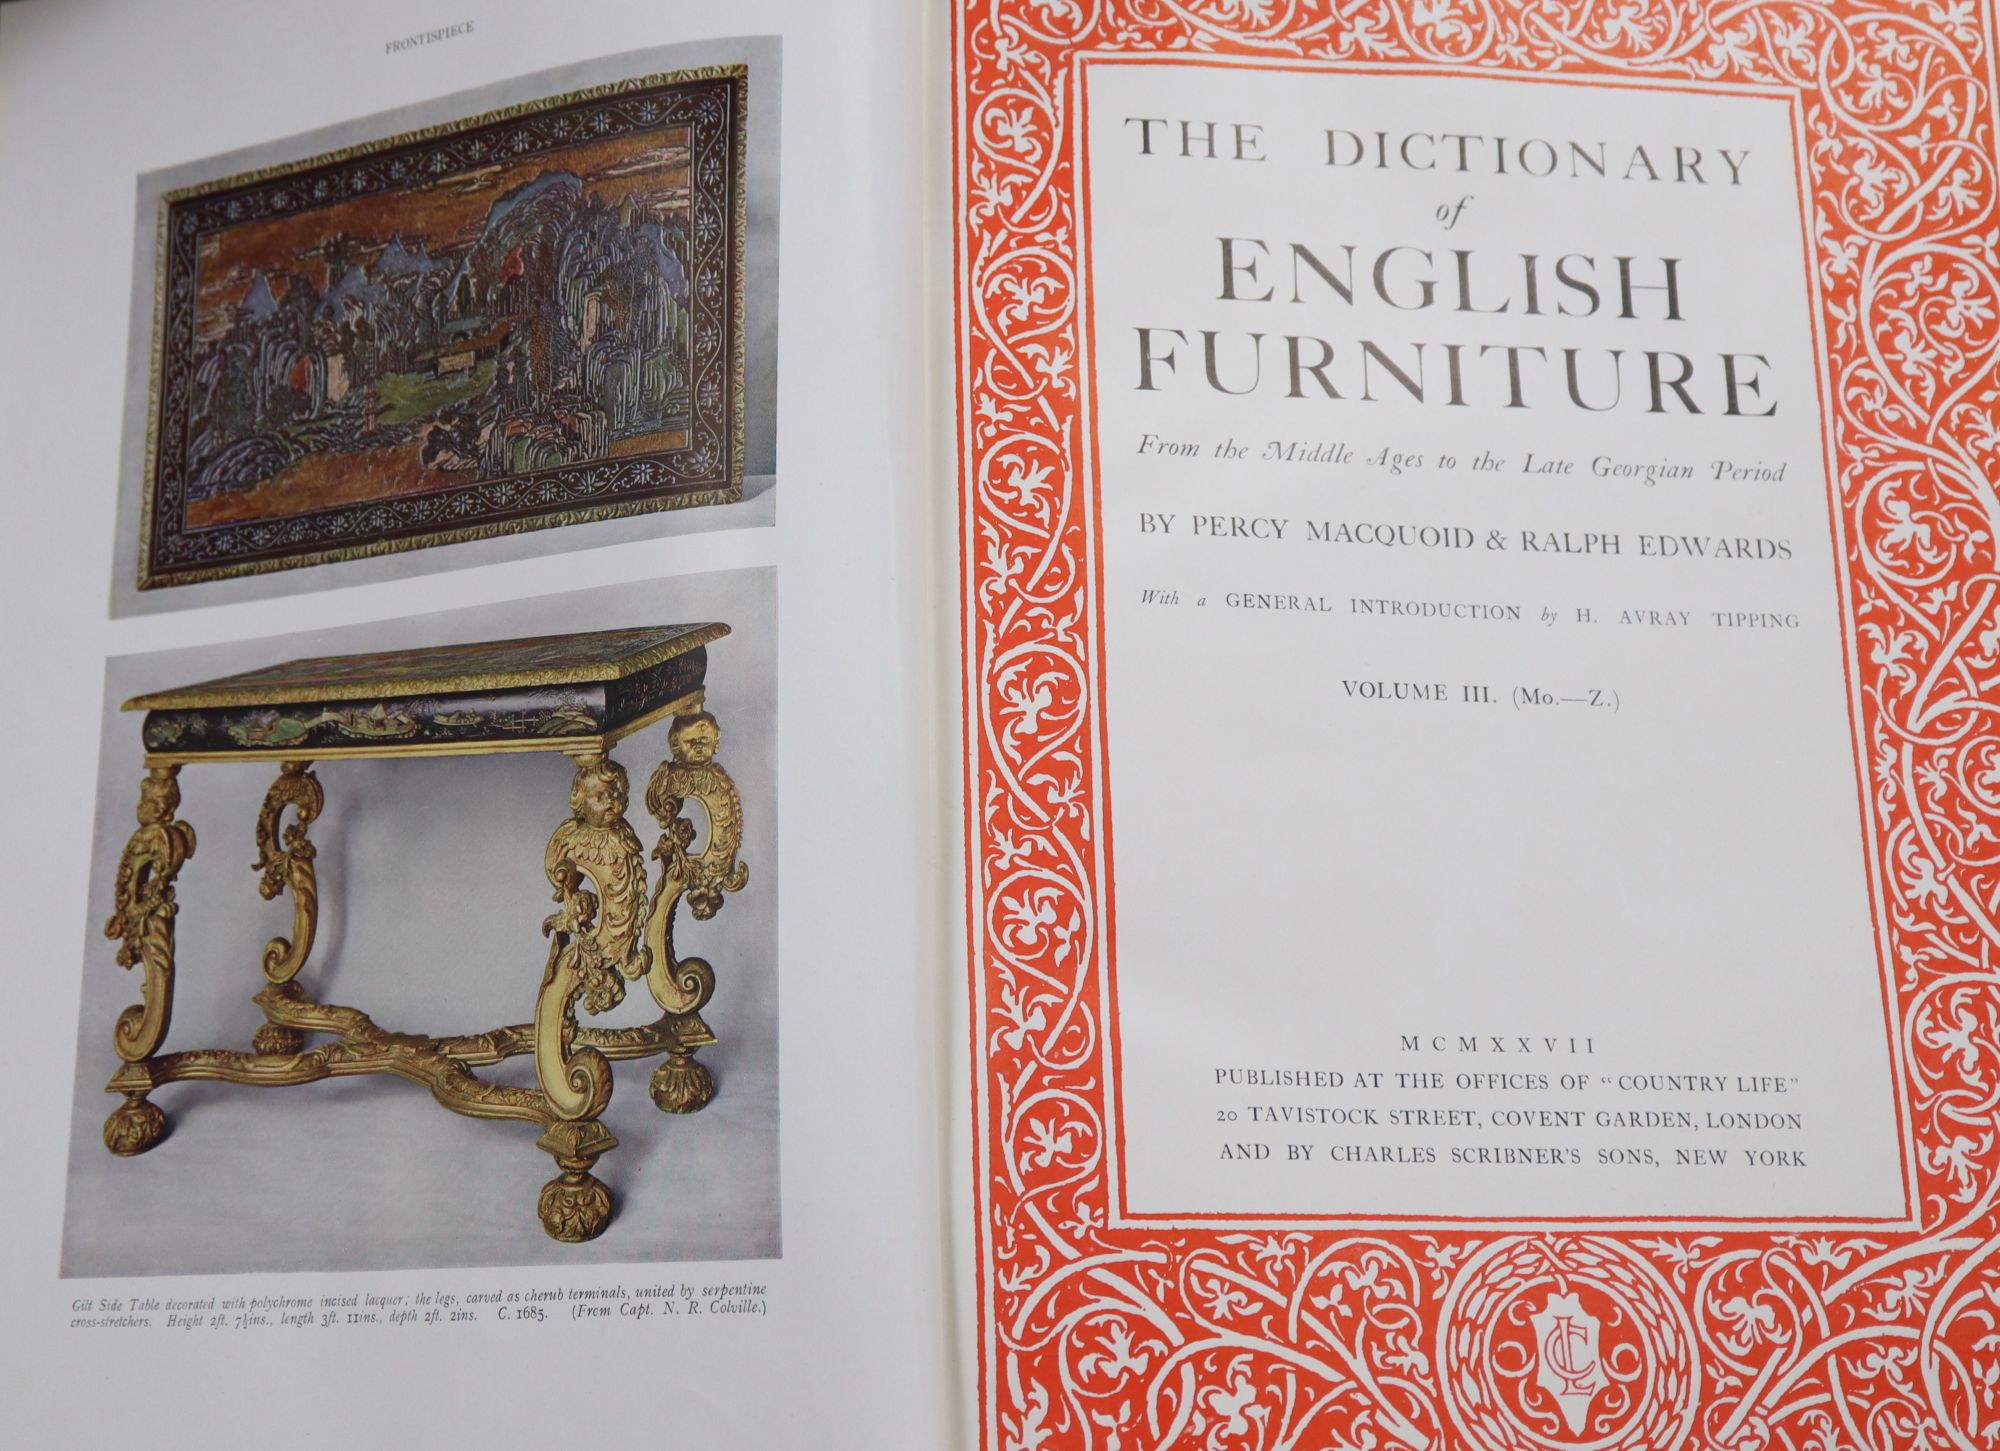 Macquoid & Edwards, The Dictionary of English Furniture, vols 1, 2 and 3